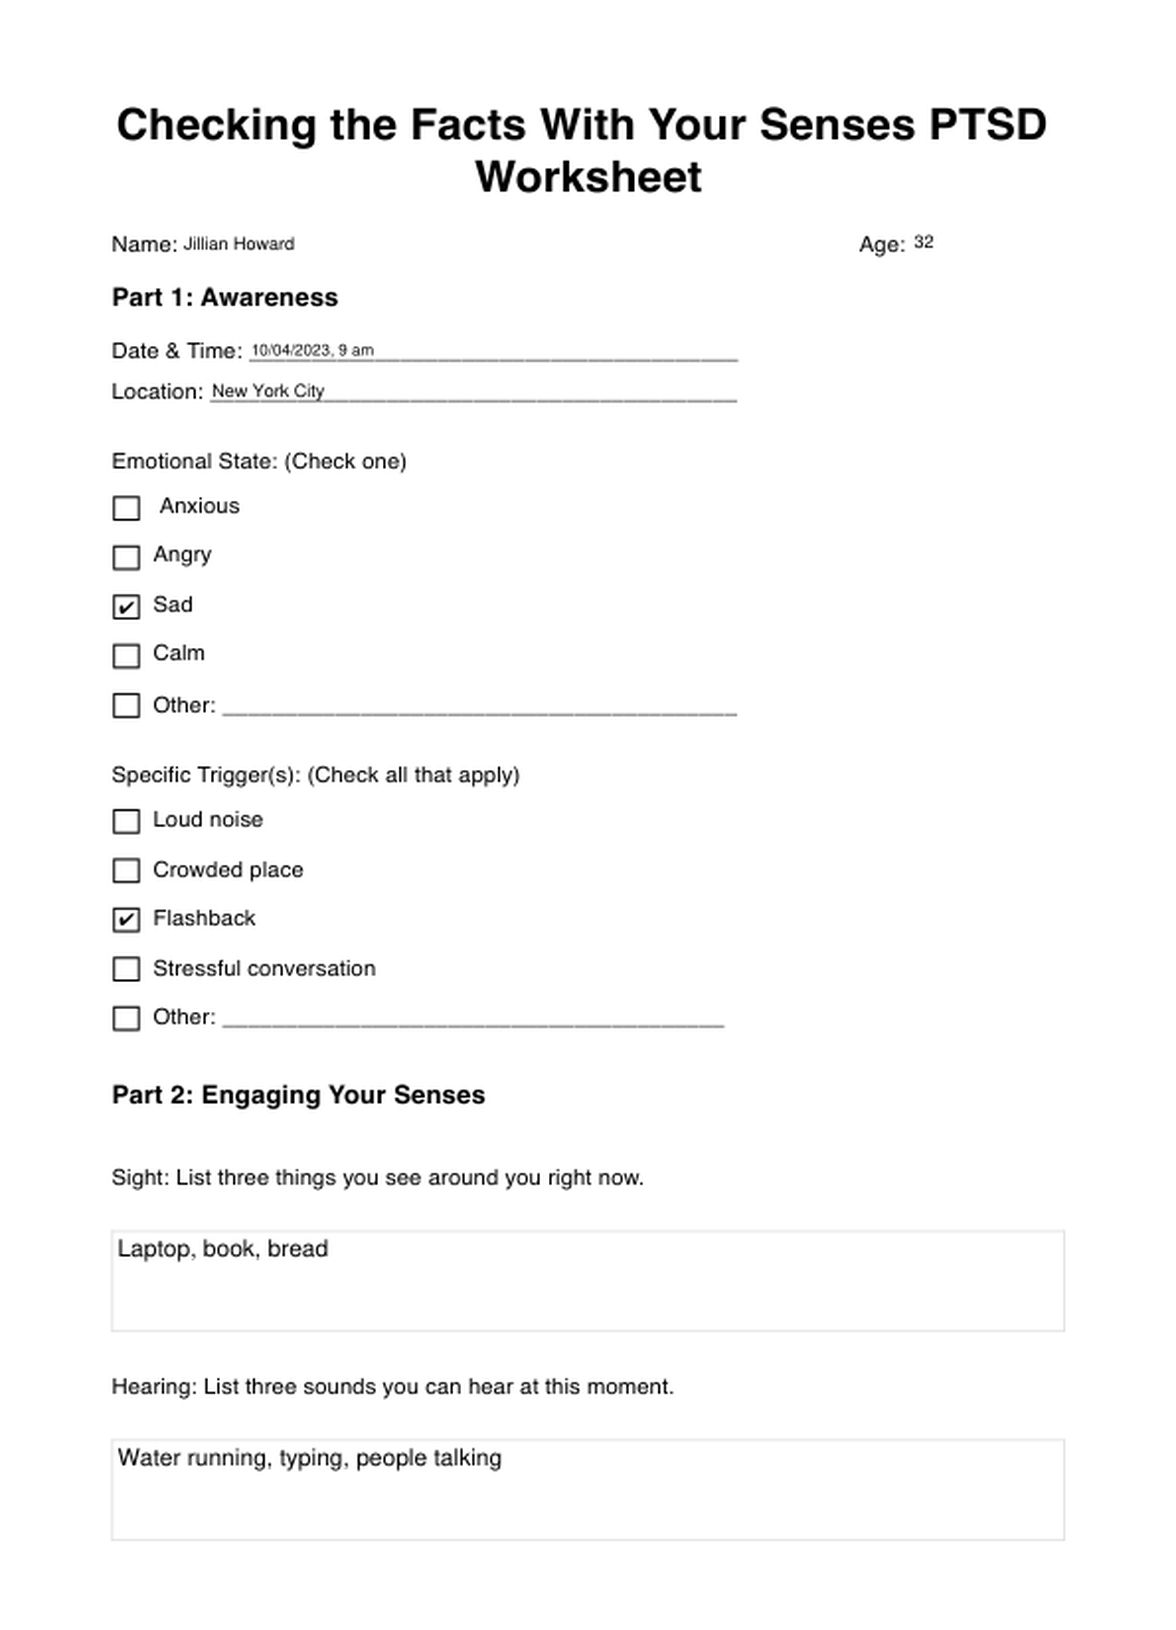 Checking the Facts With Your Senses PTSD Worksheet PDF Example